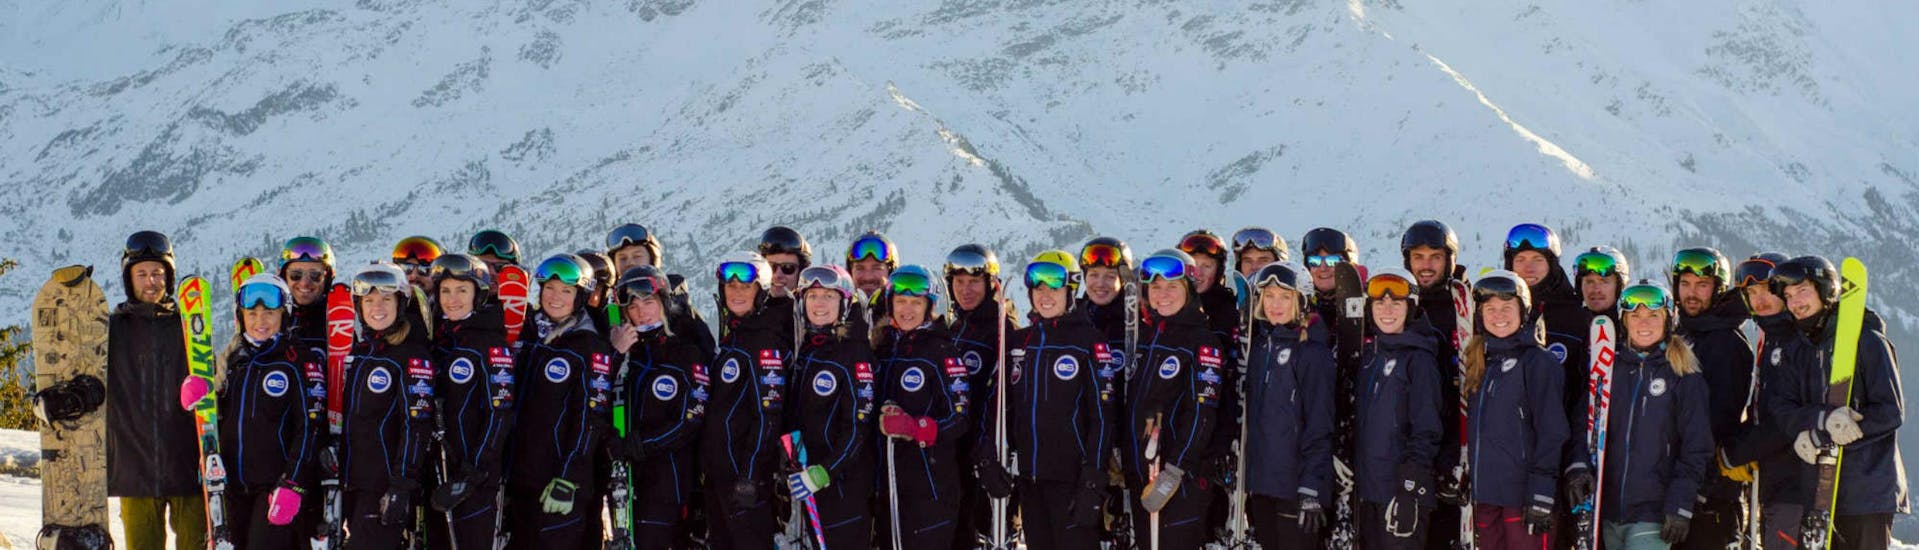 The ski instructors from the ski school European Snowsport Chamonix are posing together on top of one of the many pistes in the ski resort of Chamonix.